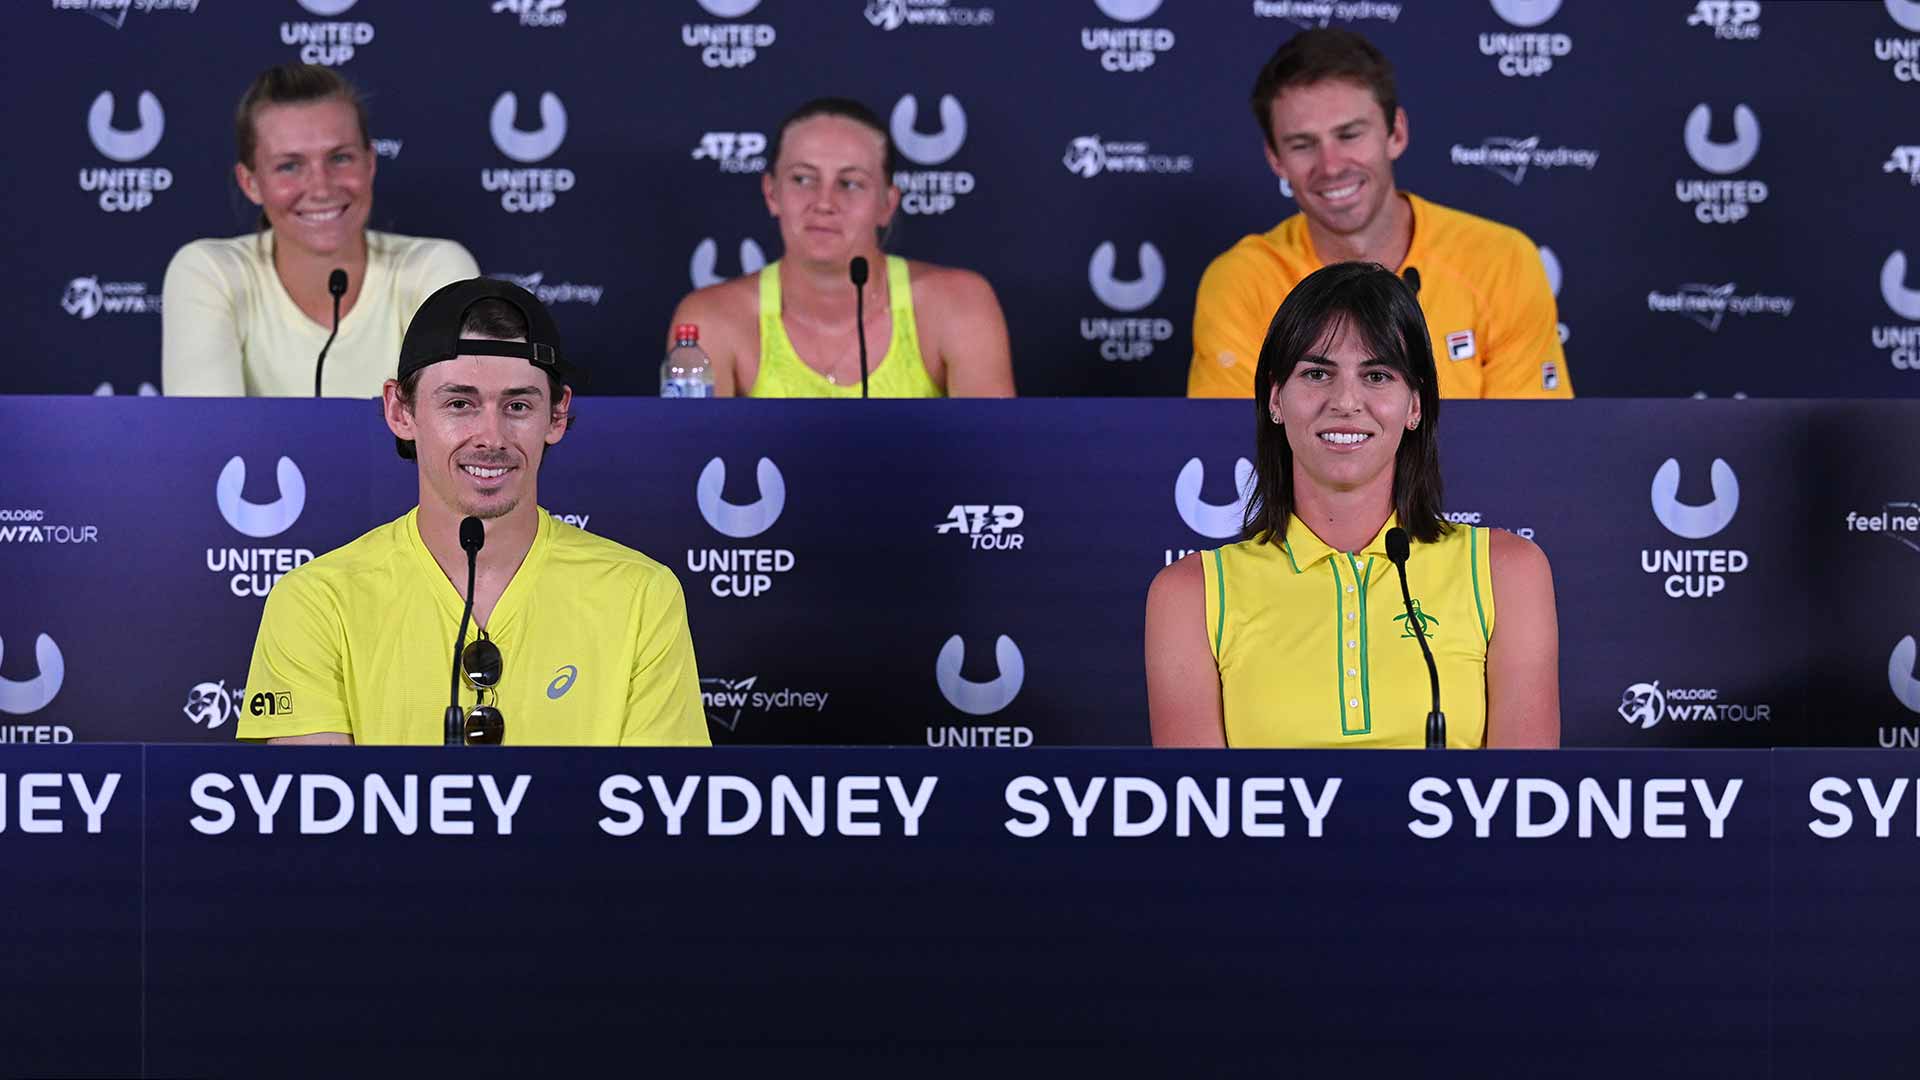 Australia Ready To Carry Home Hopes In Group D United Cup Tennis